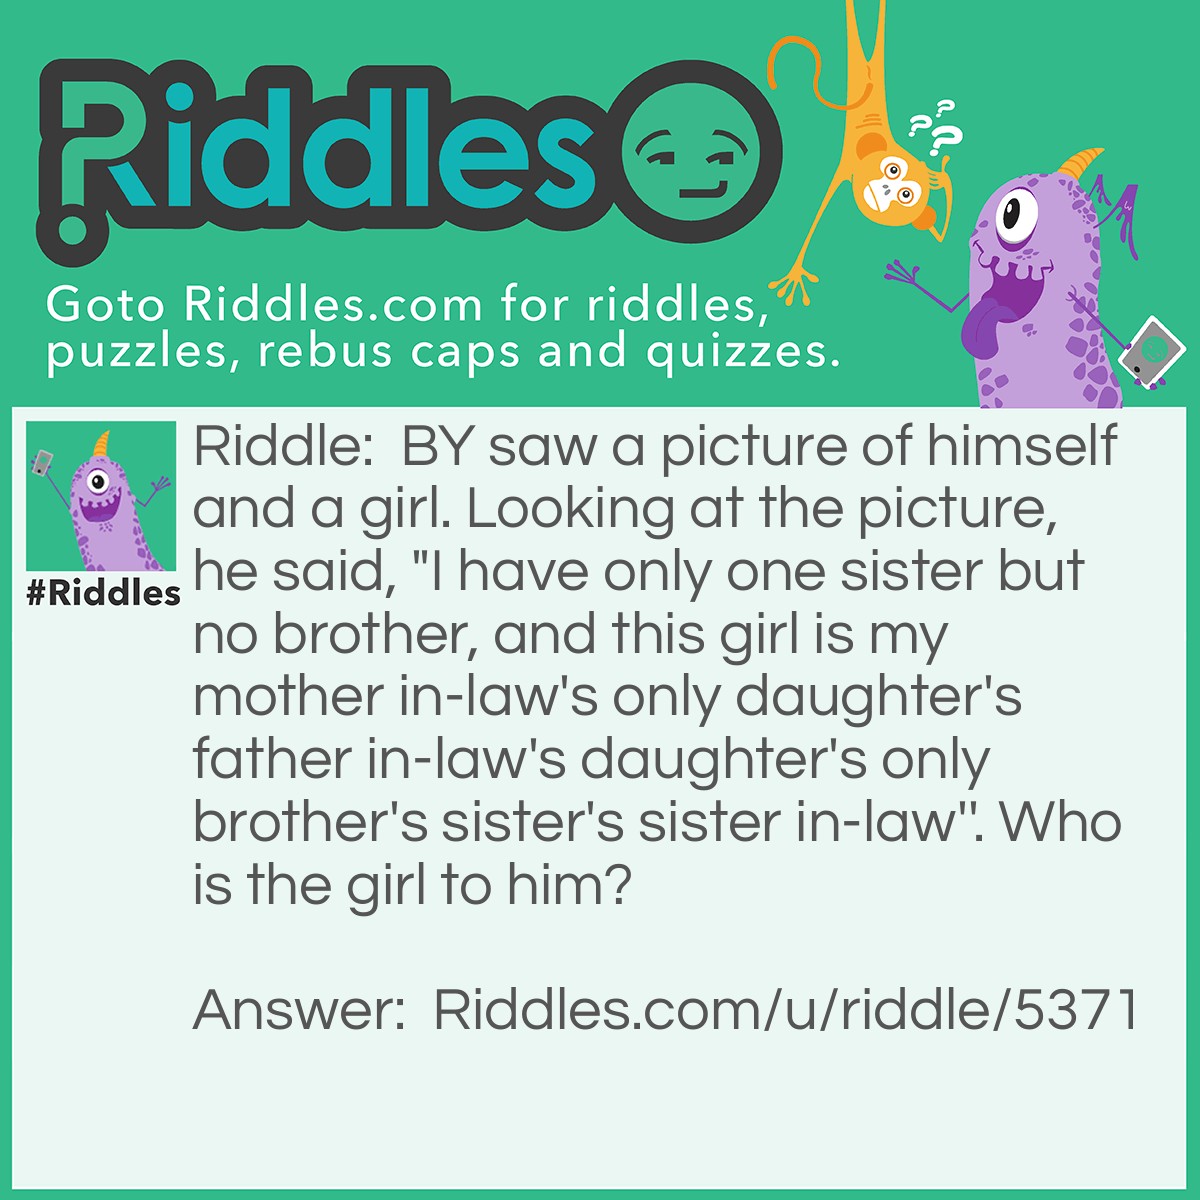 Riddle: BY saw a picture of himself and a girl. Looking at the picture, he said, "I have only one sister but no brother, and this girl is my mother in-law's only daughter's father in-law's daughter's only brother's sister's sister in-law''. Who is the girl to him? Answer: His wife.